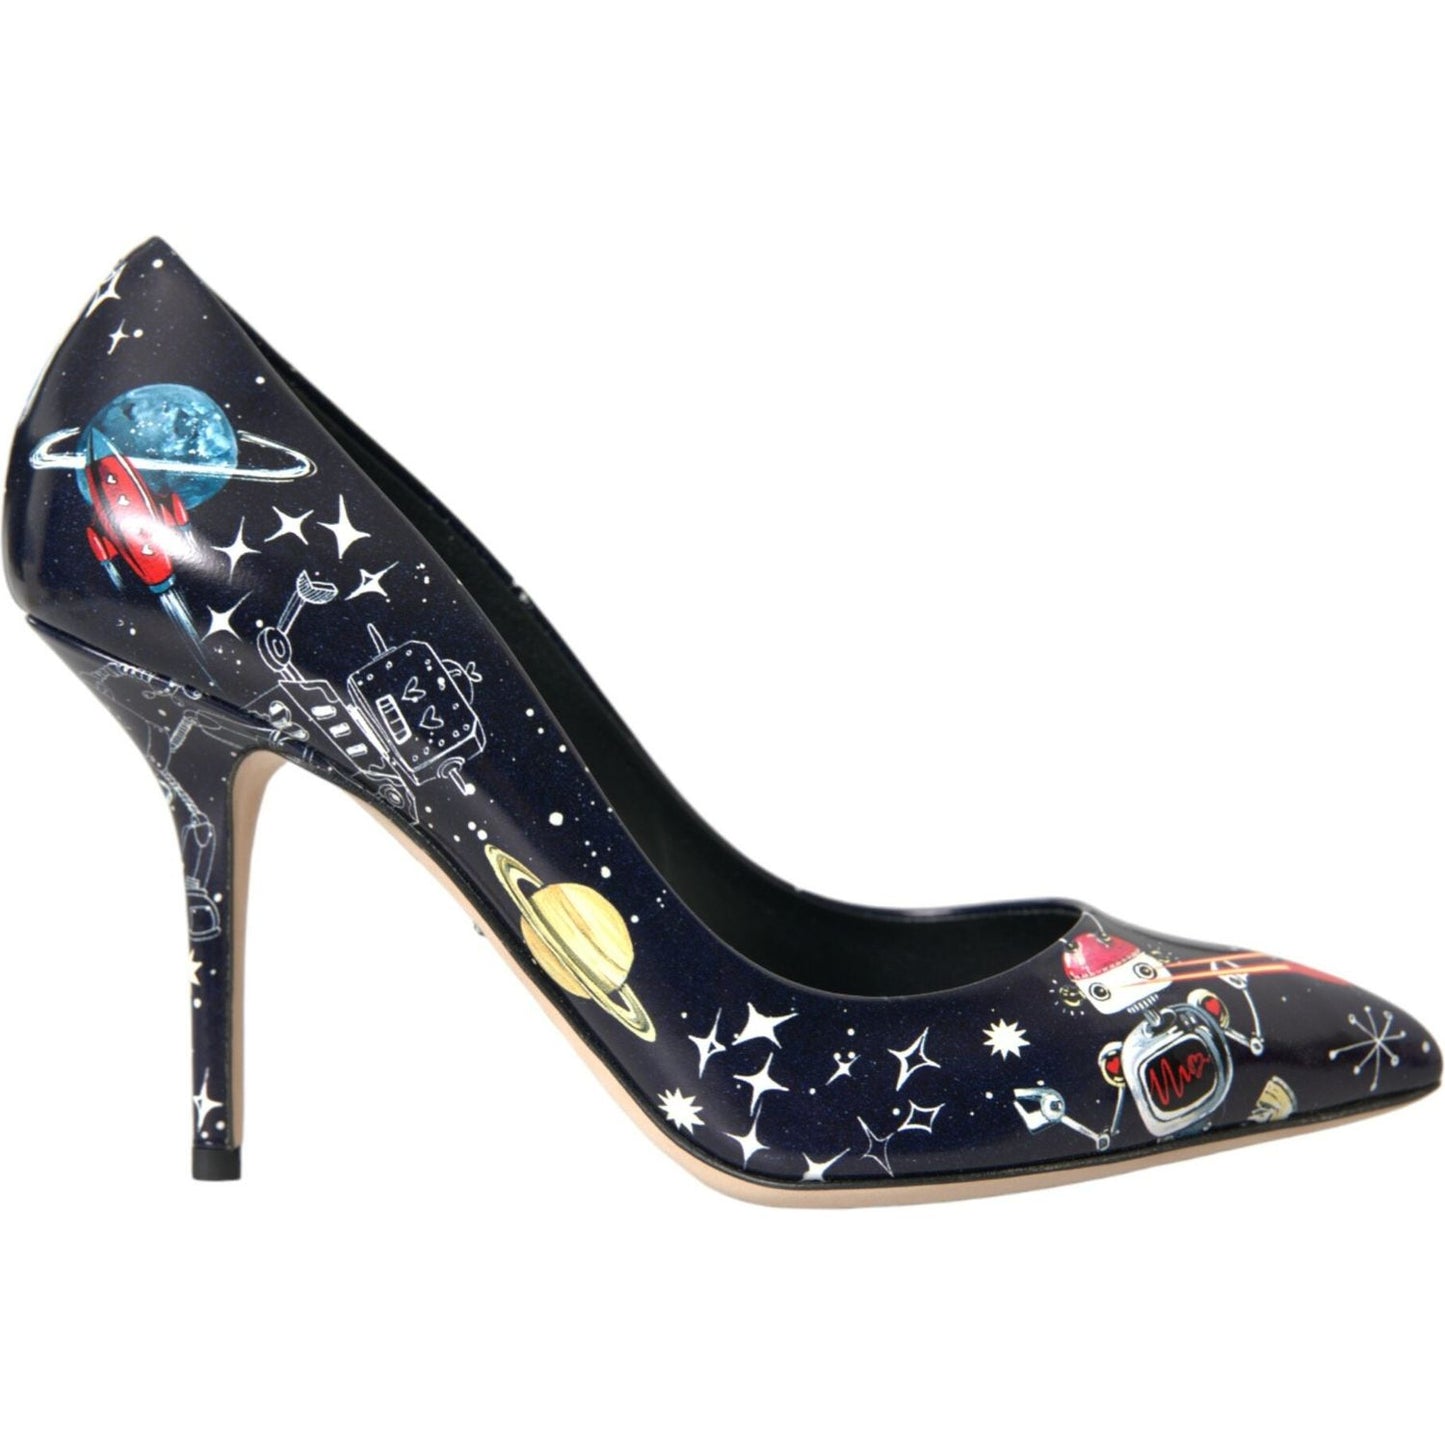 Dolce & Gabbana Blue Space Robot Leather Heels Pumps Shoes blue-space-robot-leather-heels-pumps-shoes